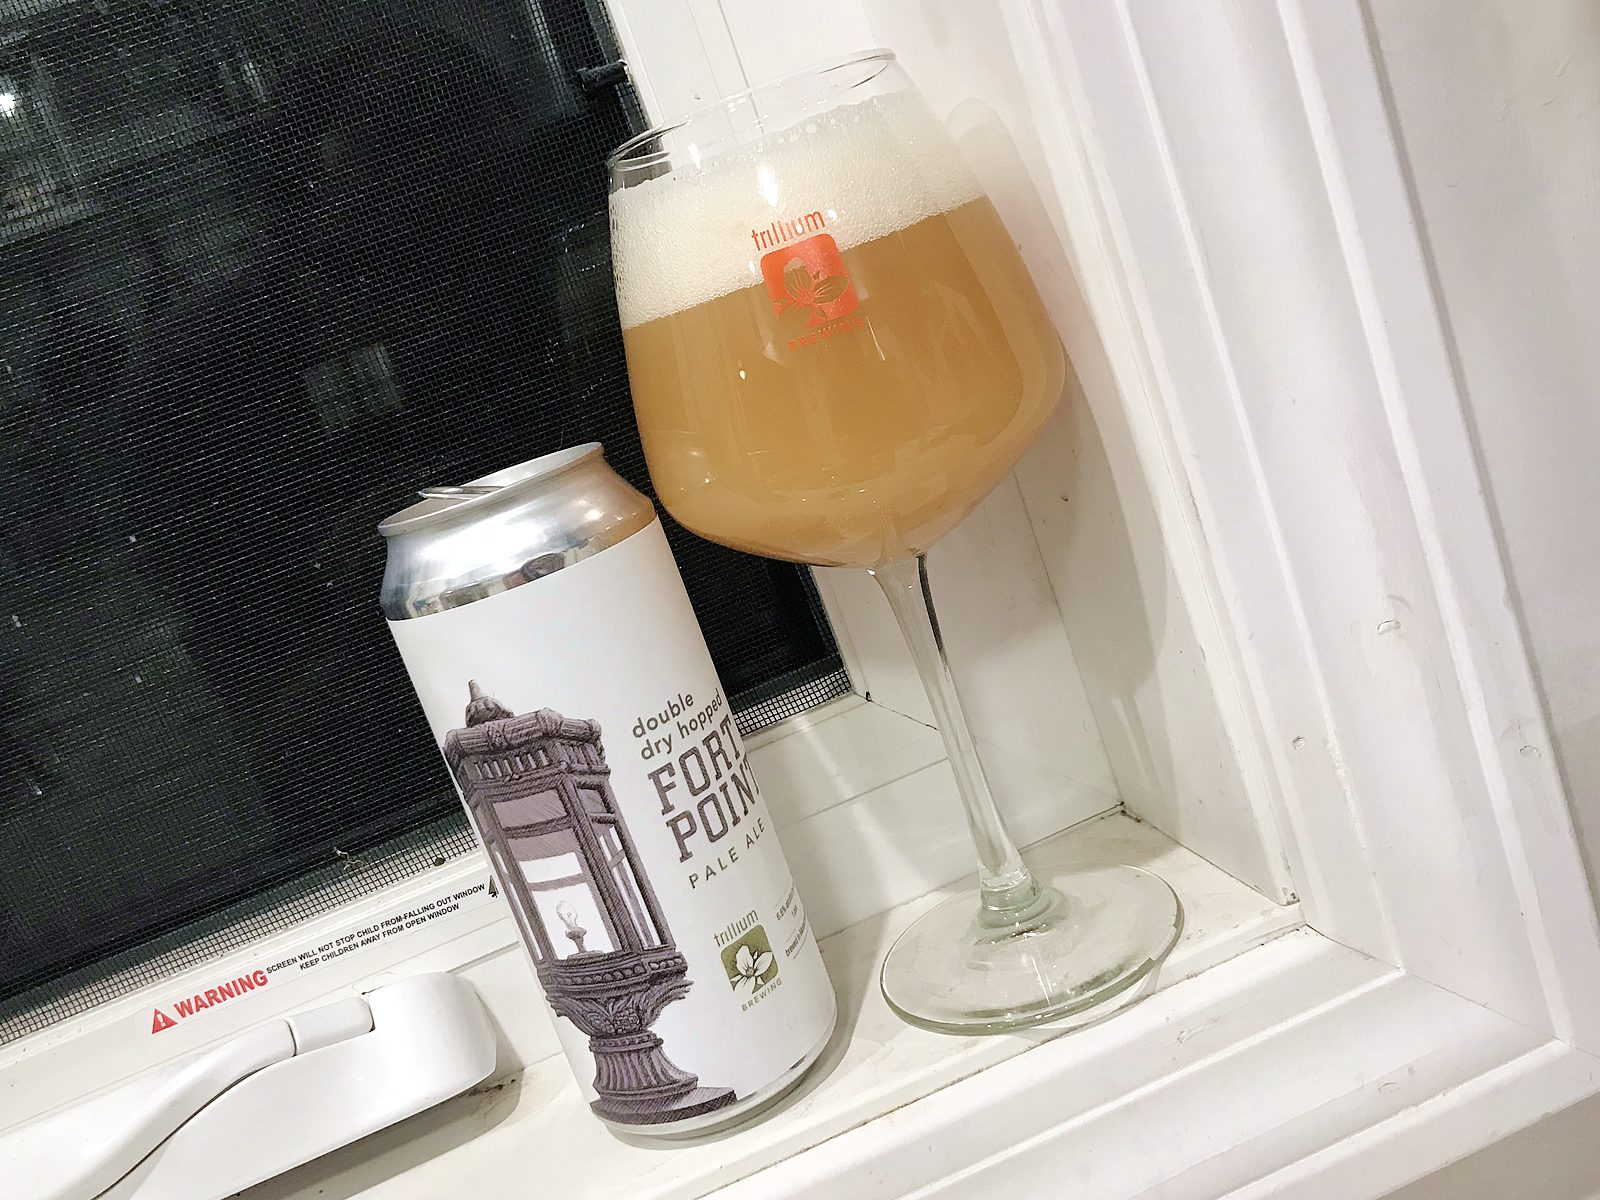 Trillium Brewing Company: Double Dry-Hopped Fort Point